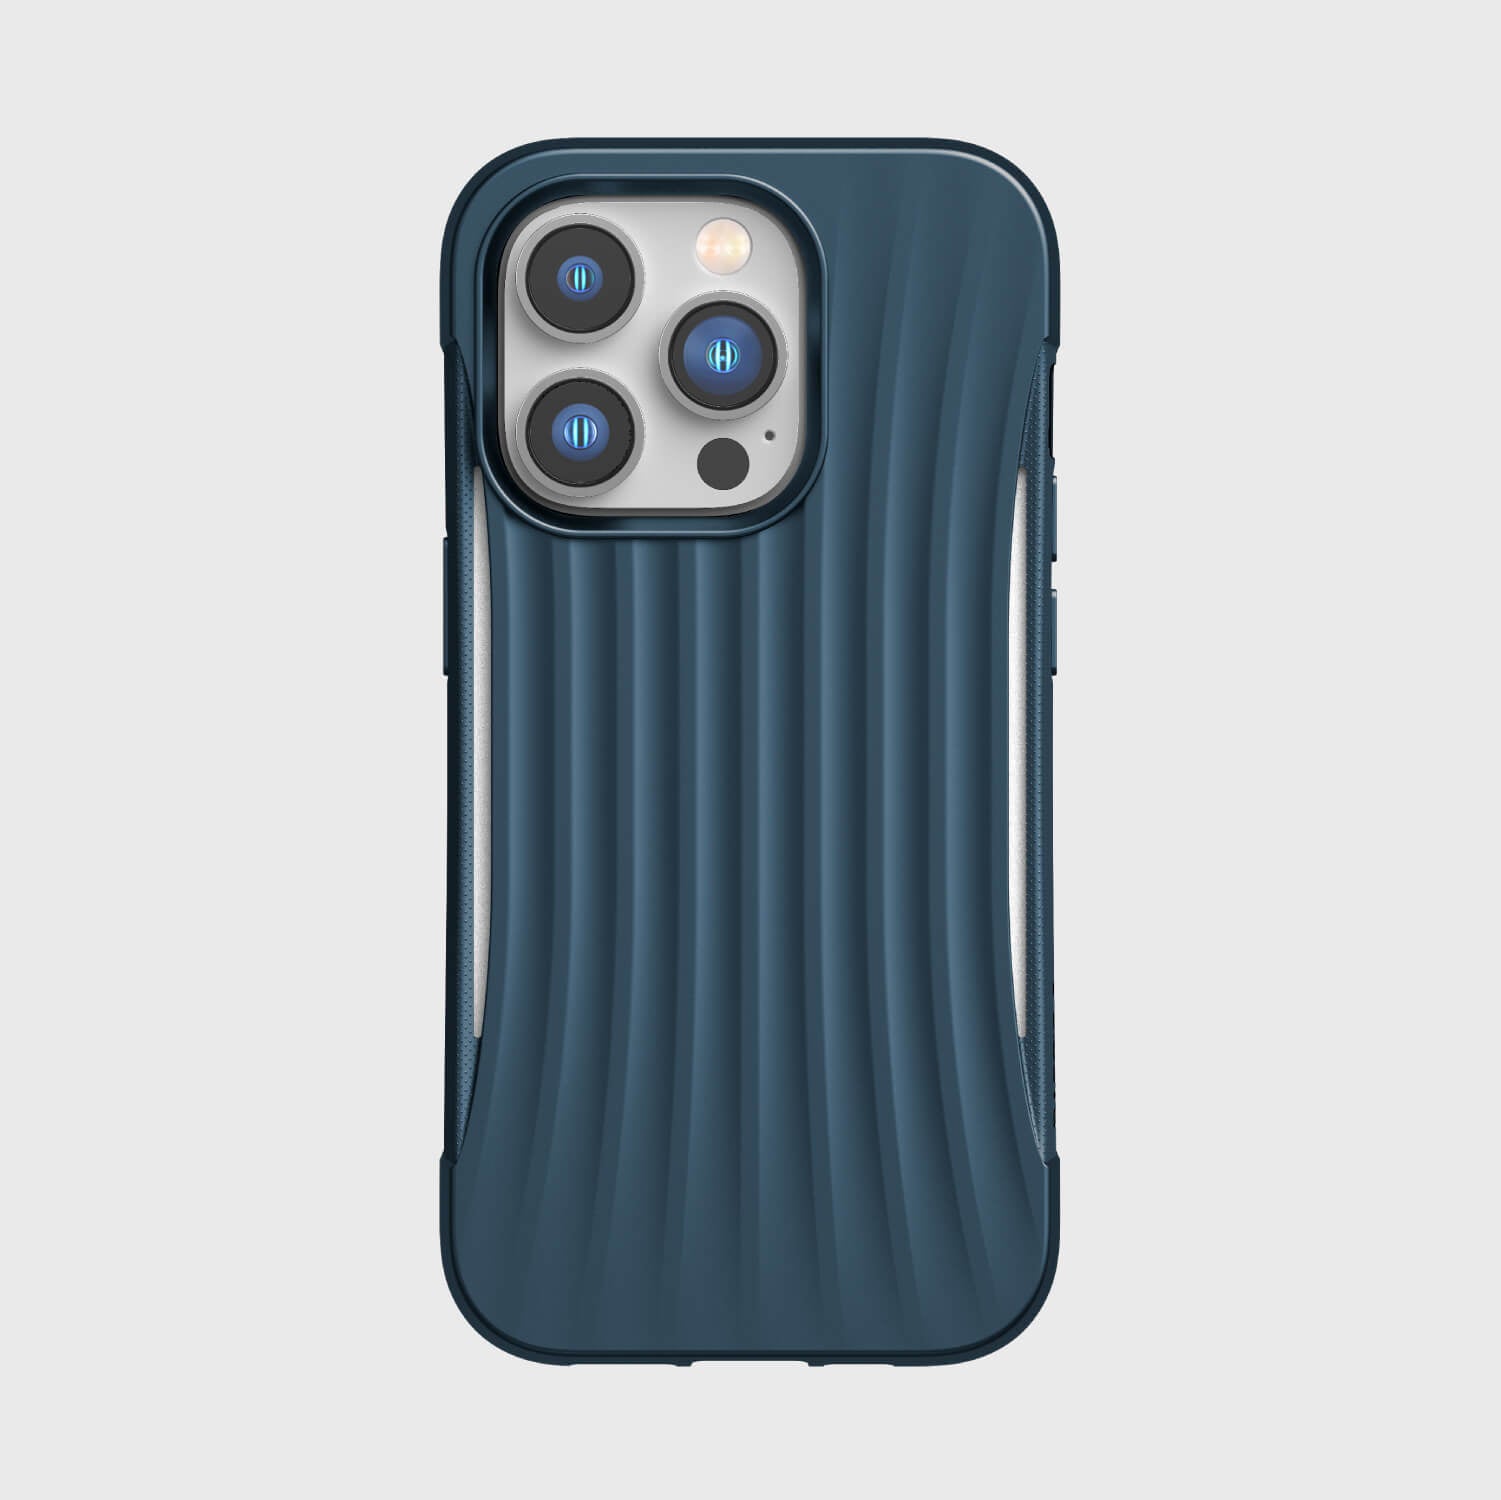 The iPhone 14 Pro Case ~ Clutch by Raptic is shown in blue.